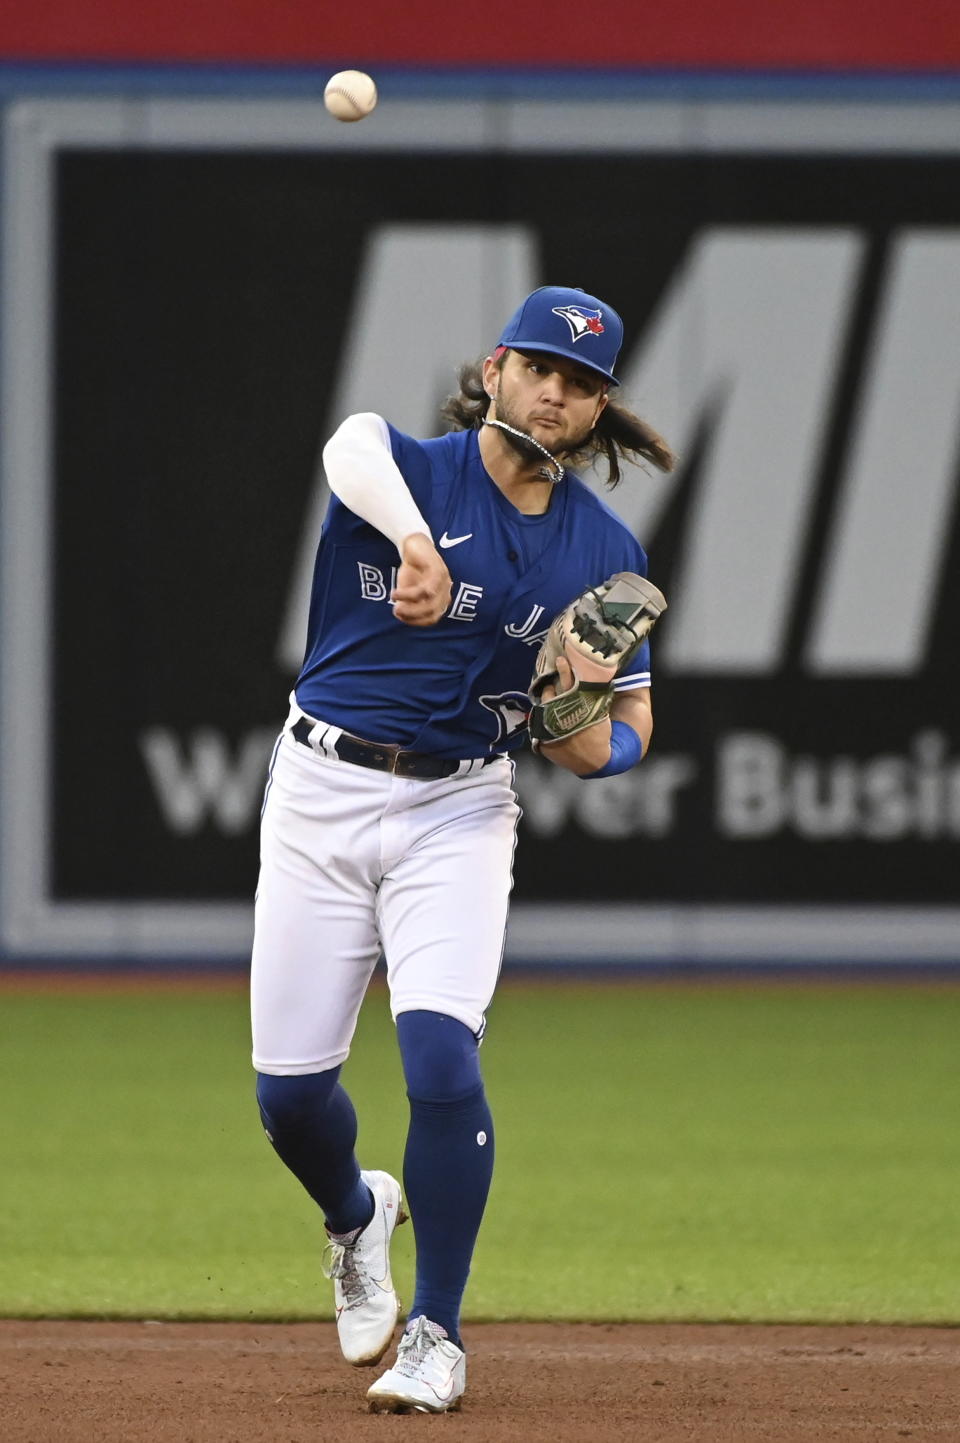 Toronto Blue Jays shortstop Bo Bichette throws to first base to put out Cleveland Indians' Oscar Mercado during the fifth inning of a baseball game Thursday, Aug. 5, 2021, in Toronto. (Jon Blacker/The Canadian Press via AP)